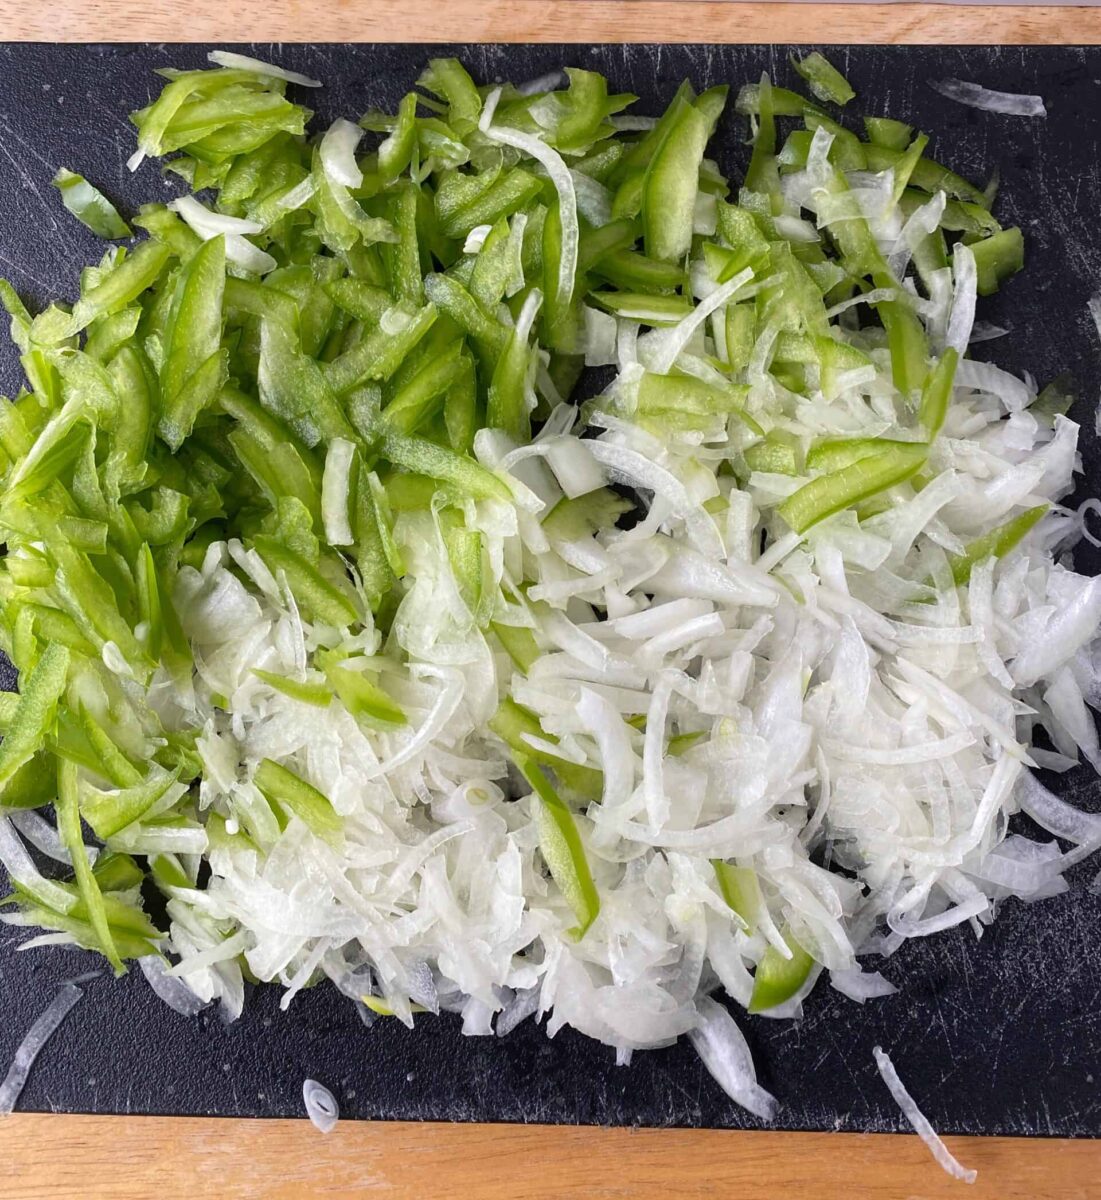 Sliced green pepper and onion on a cutting board.